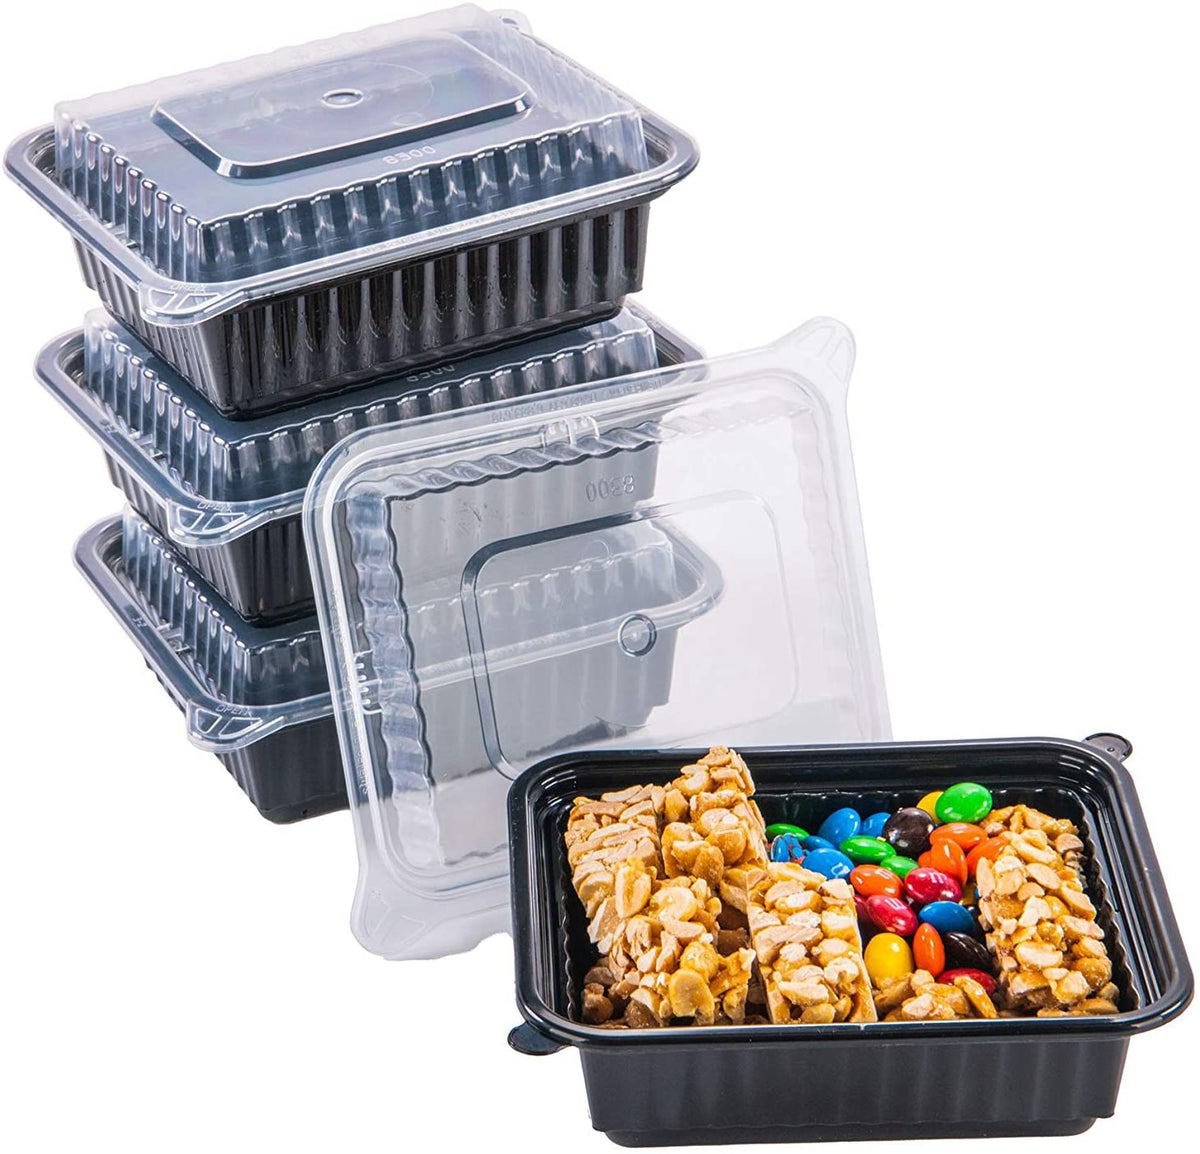 CTC-8388] 1 Compartment Rectangular Meal Prep Container with Lids